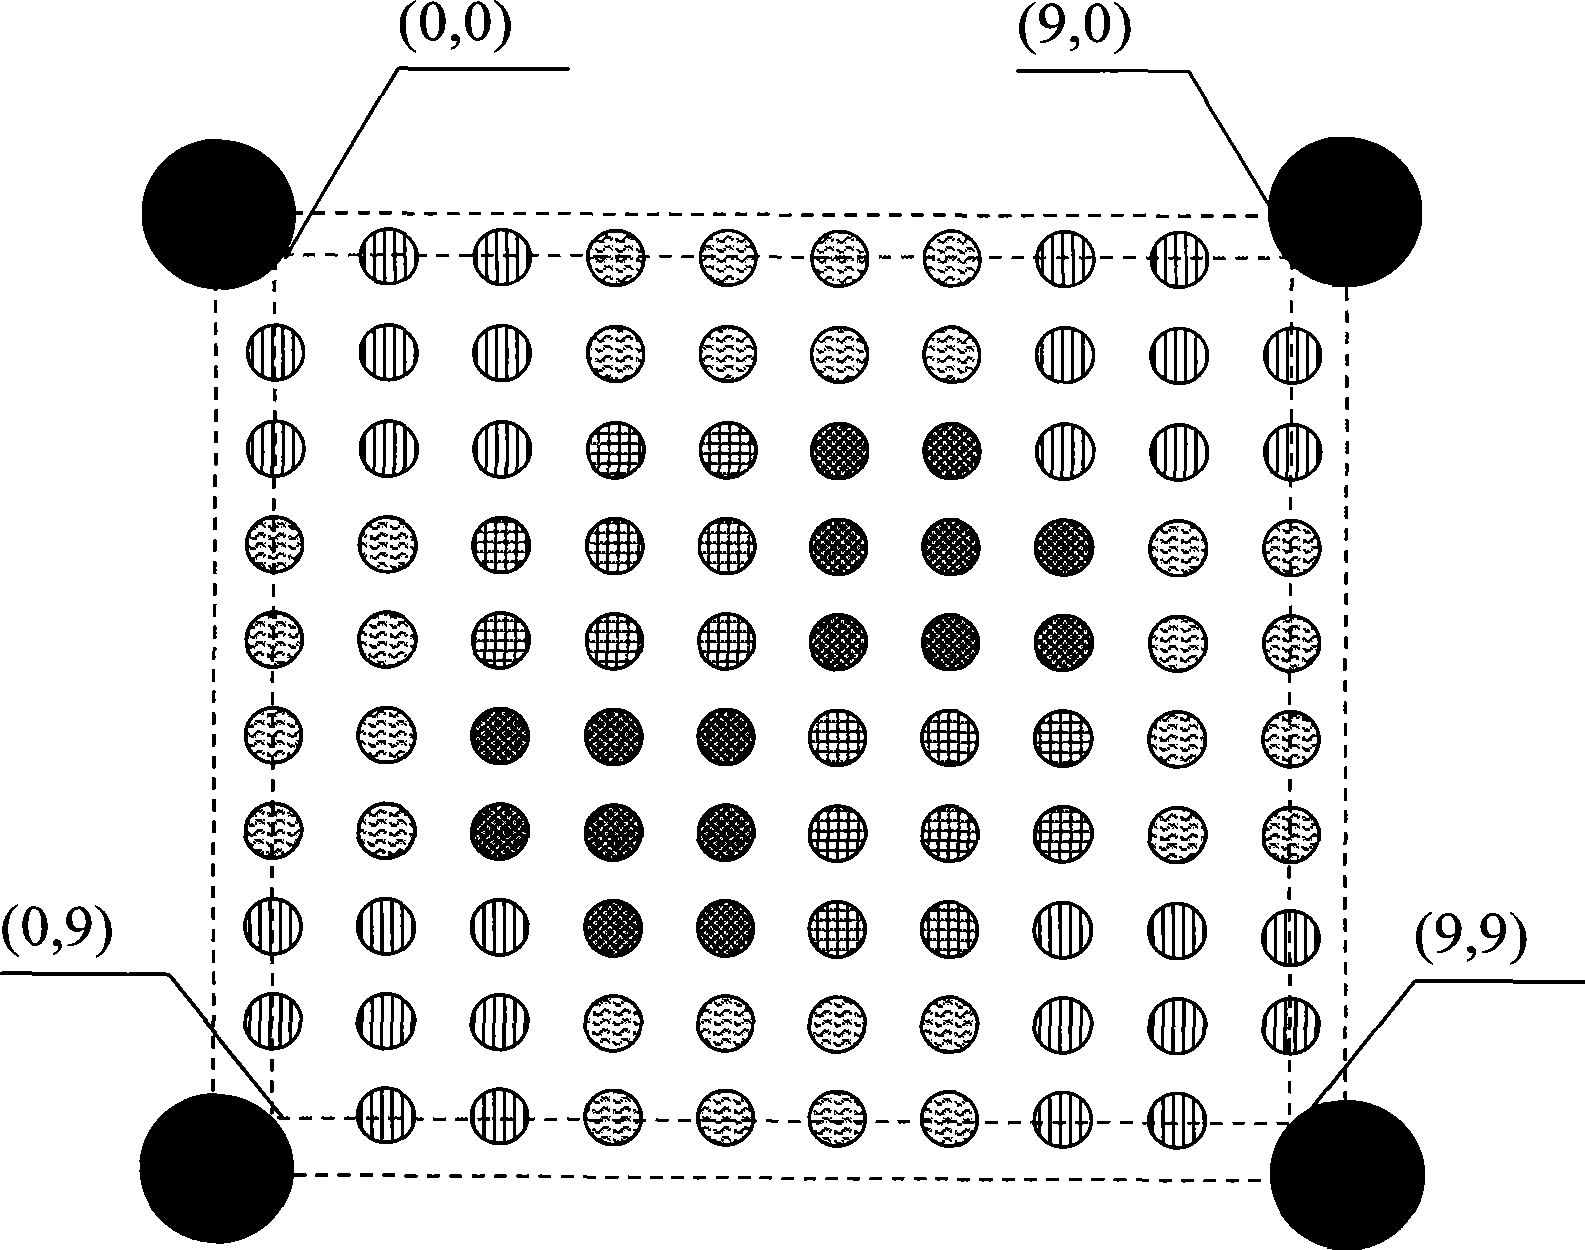 Two-dimensional code, printed publication applying the two-dimensional code and decoding process